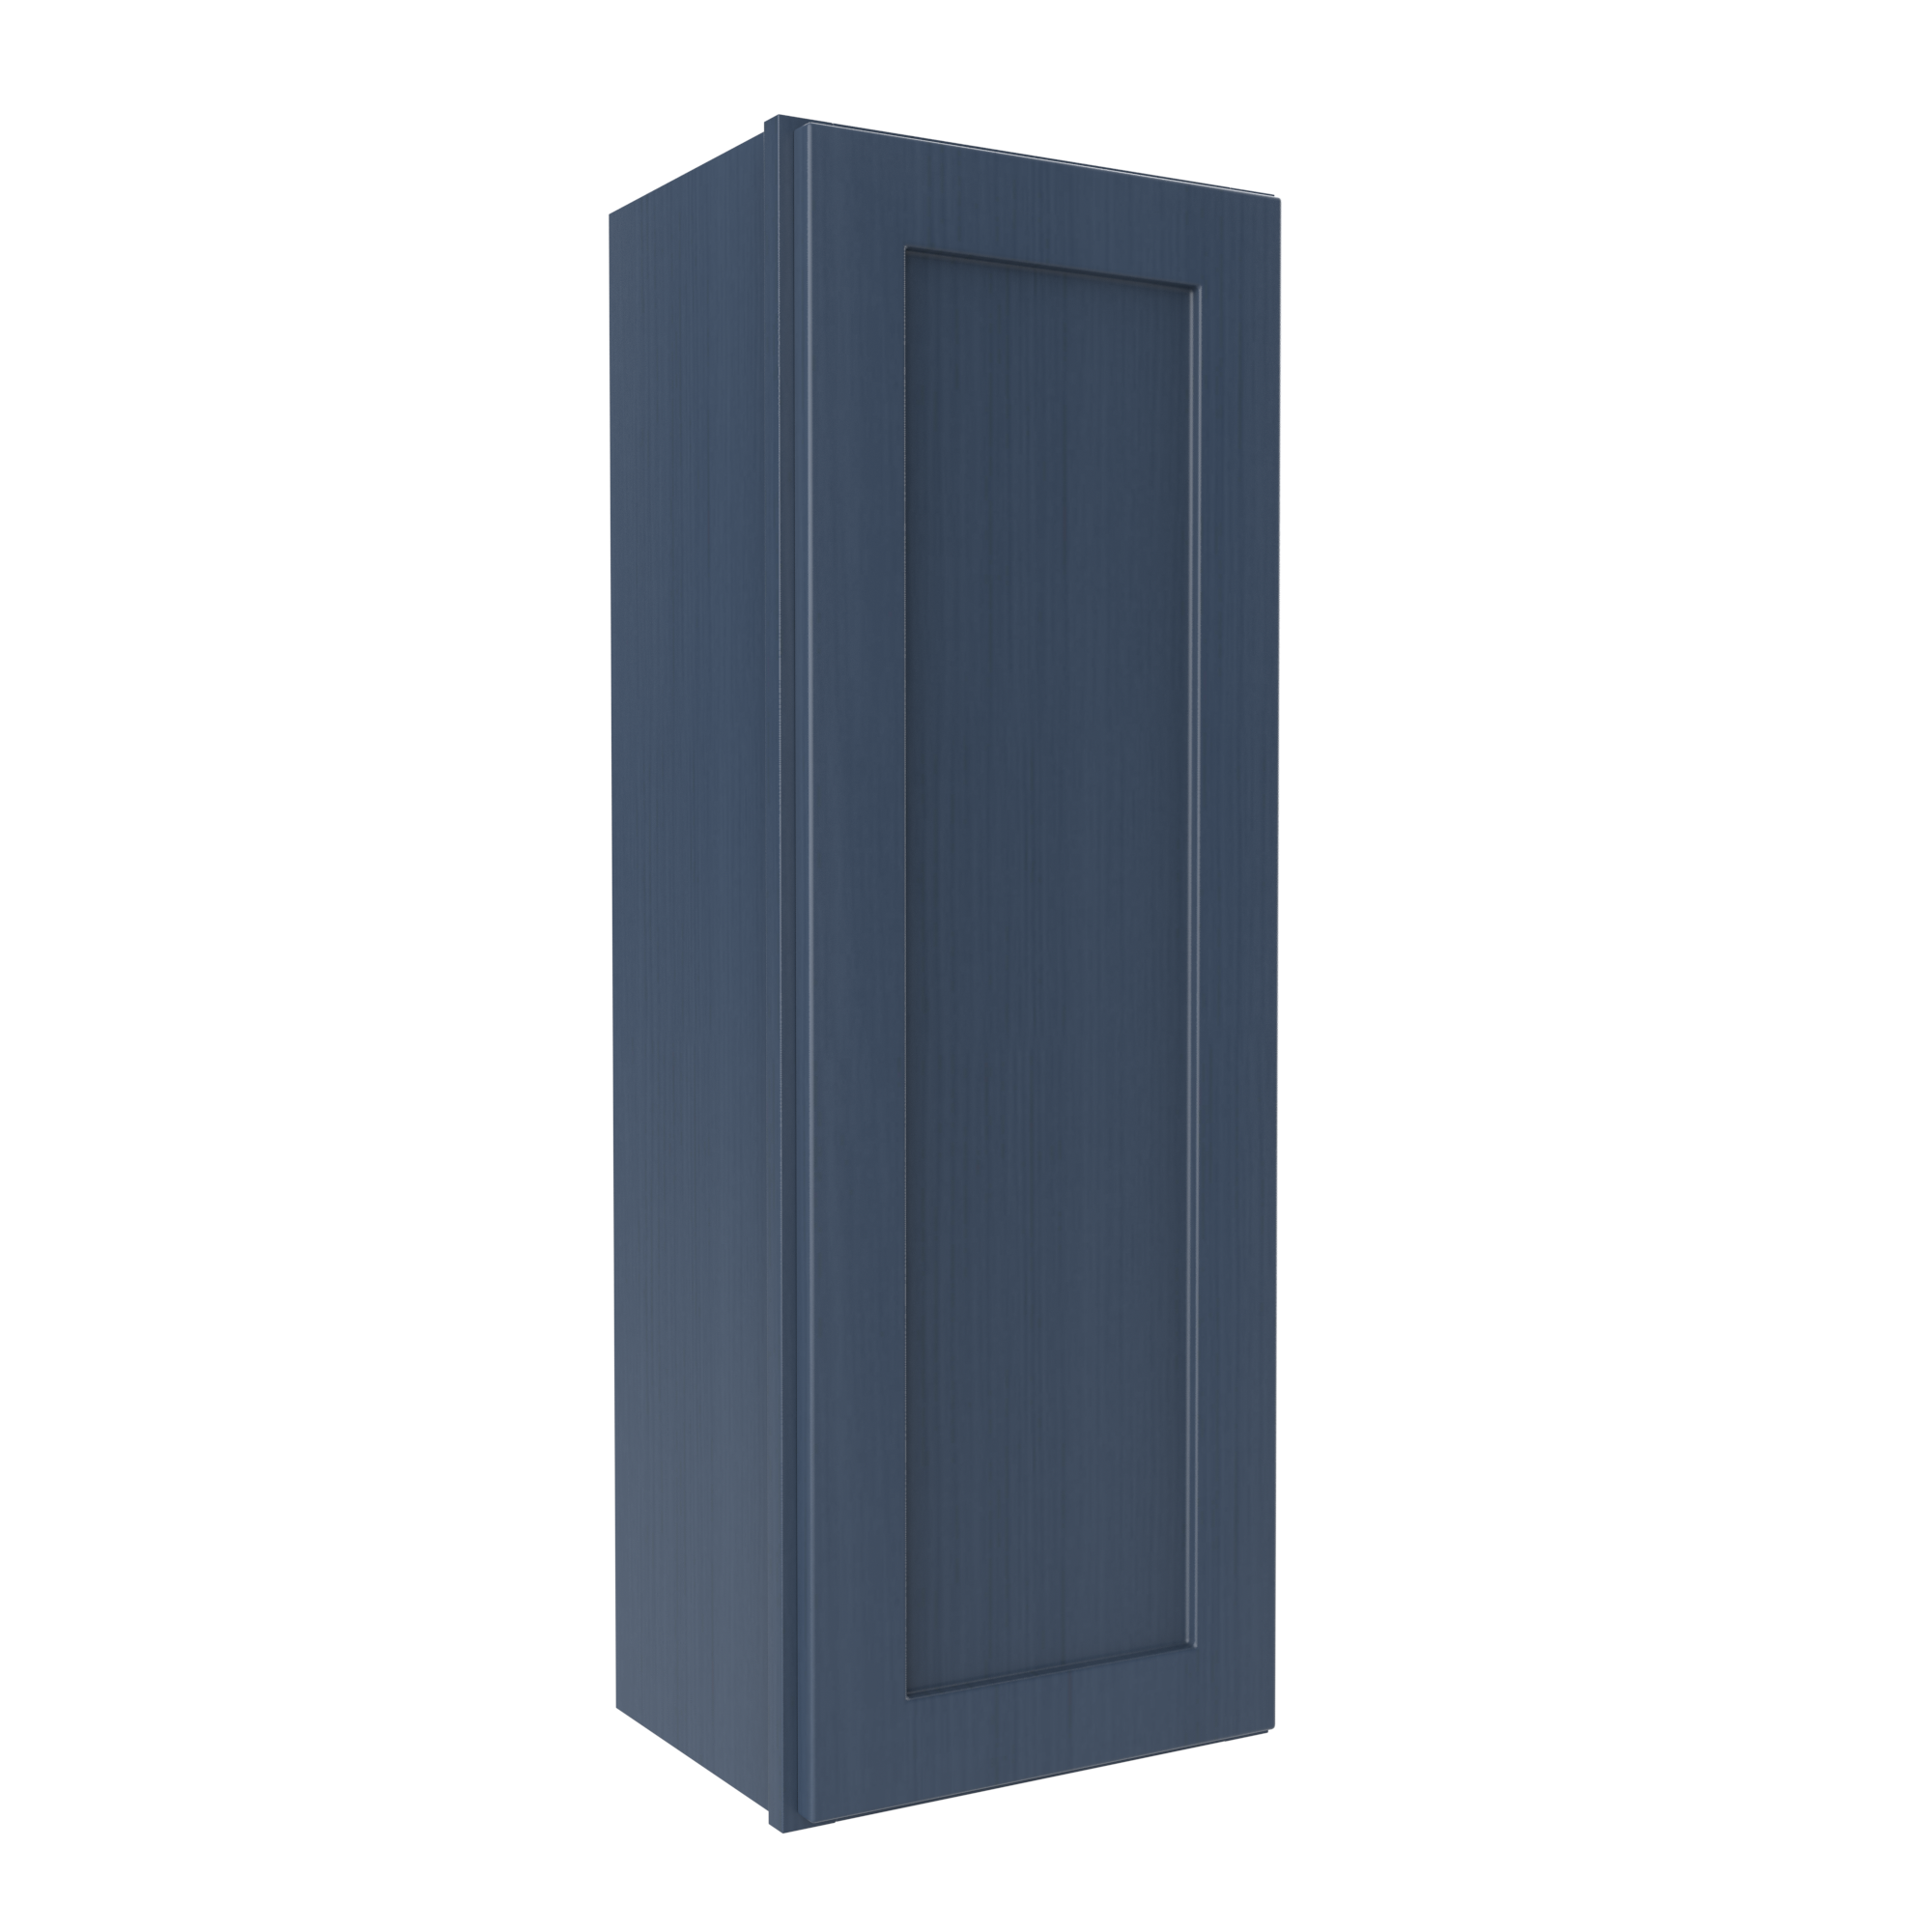 42 inch Wall Cabinet - 15W x 42H x 12D - Blue Shaker Cabinet